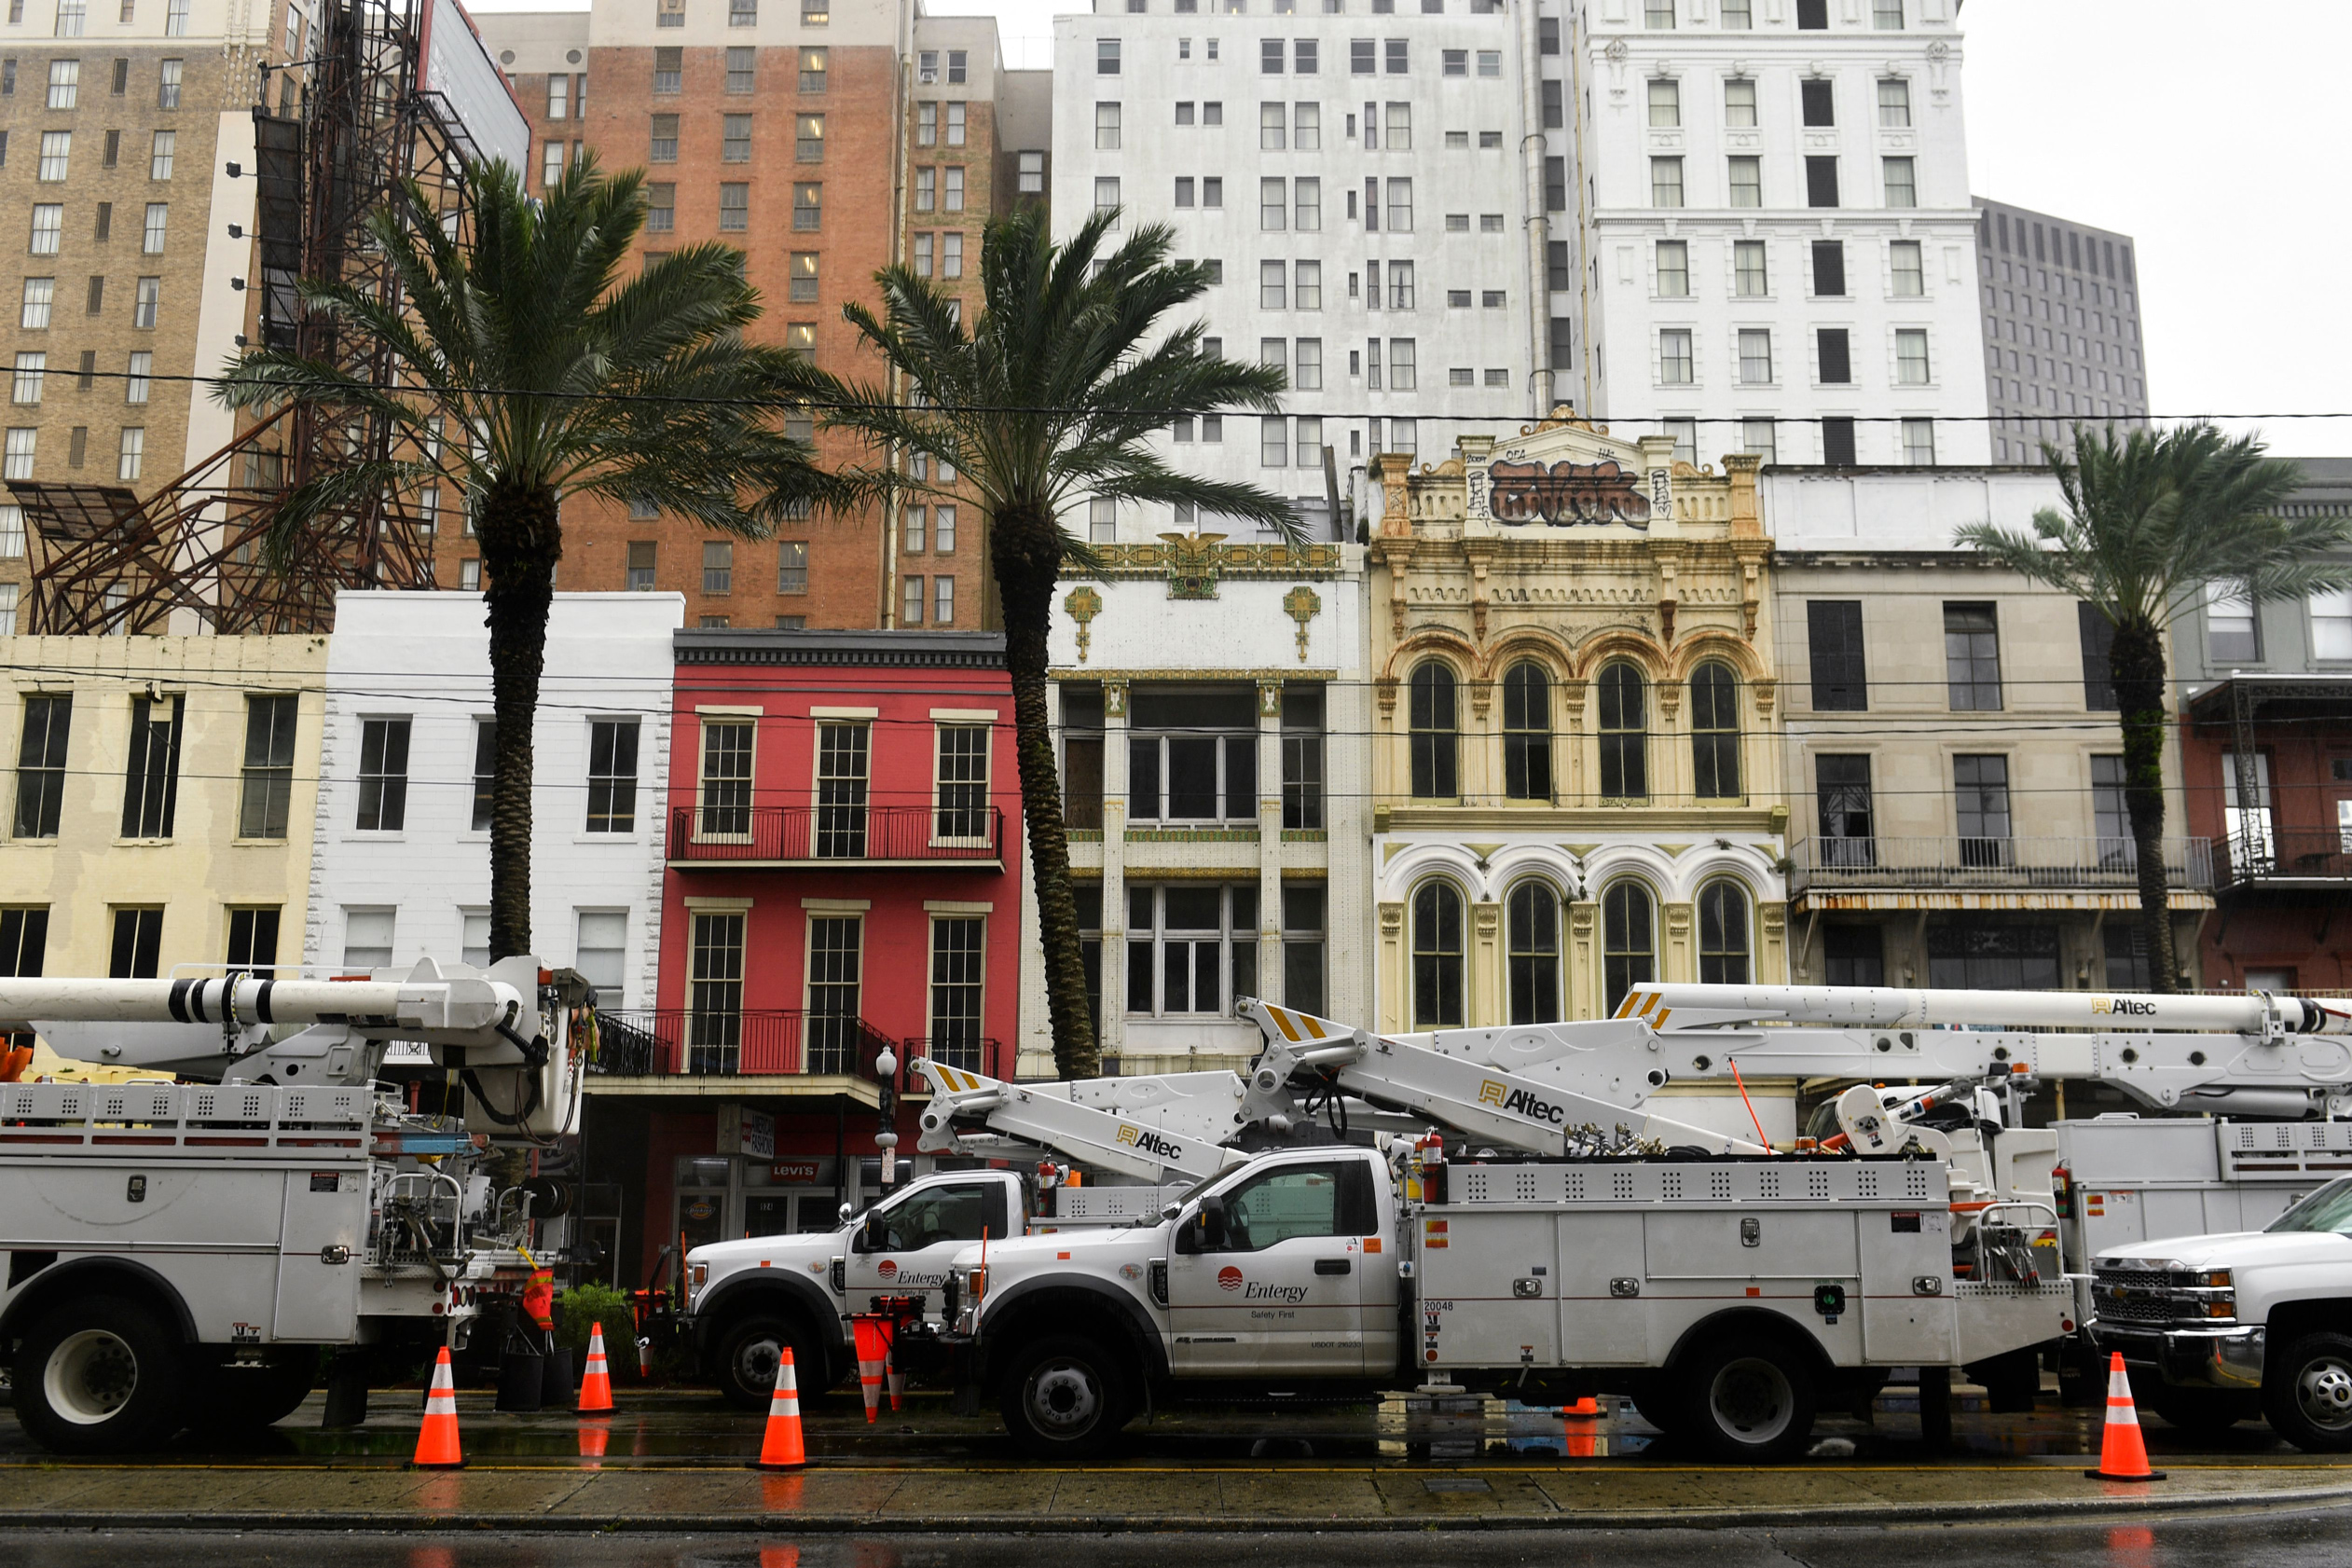 Entergy Corp. electric utility company bucket trucks are staged on Canal Street in New Orleans on Sunday, August 29, during Hurricane Ida.